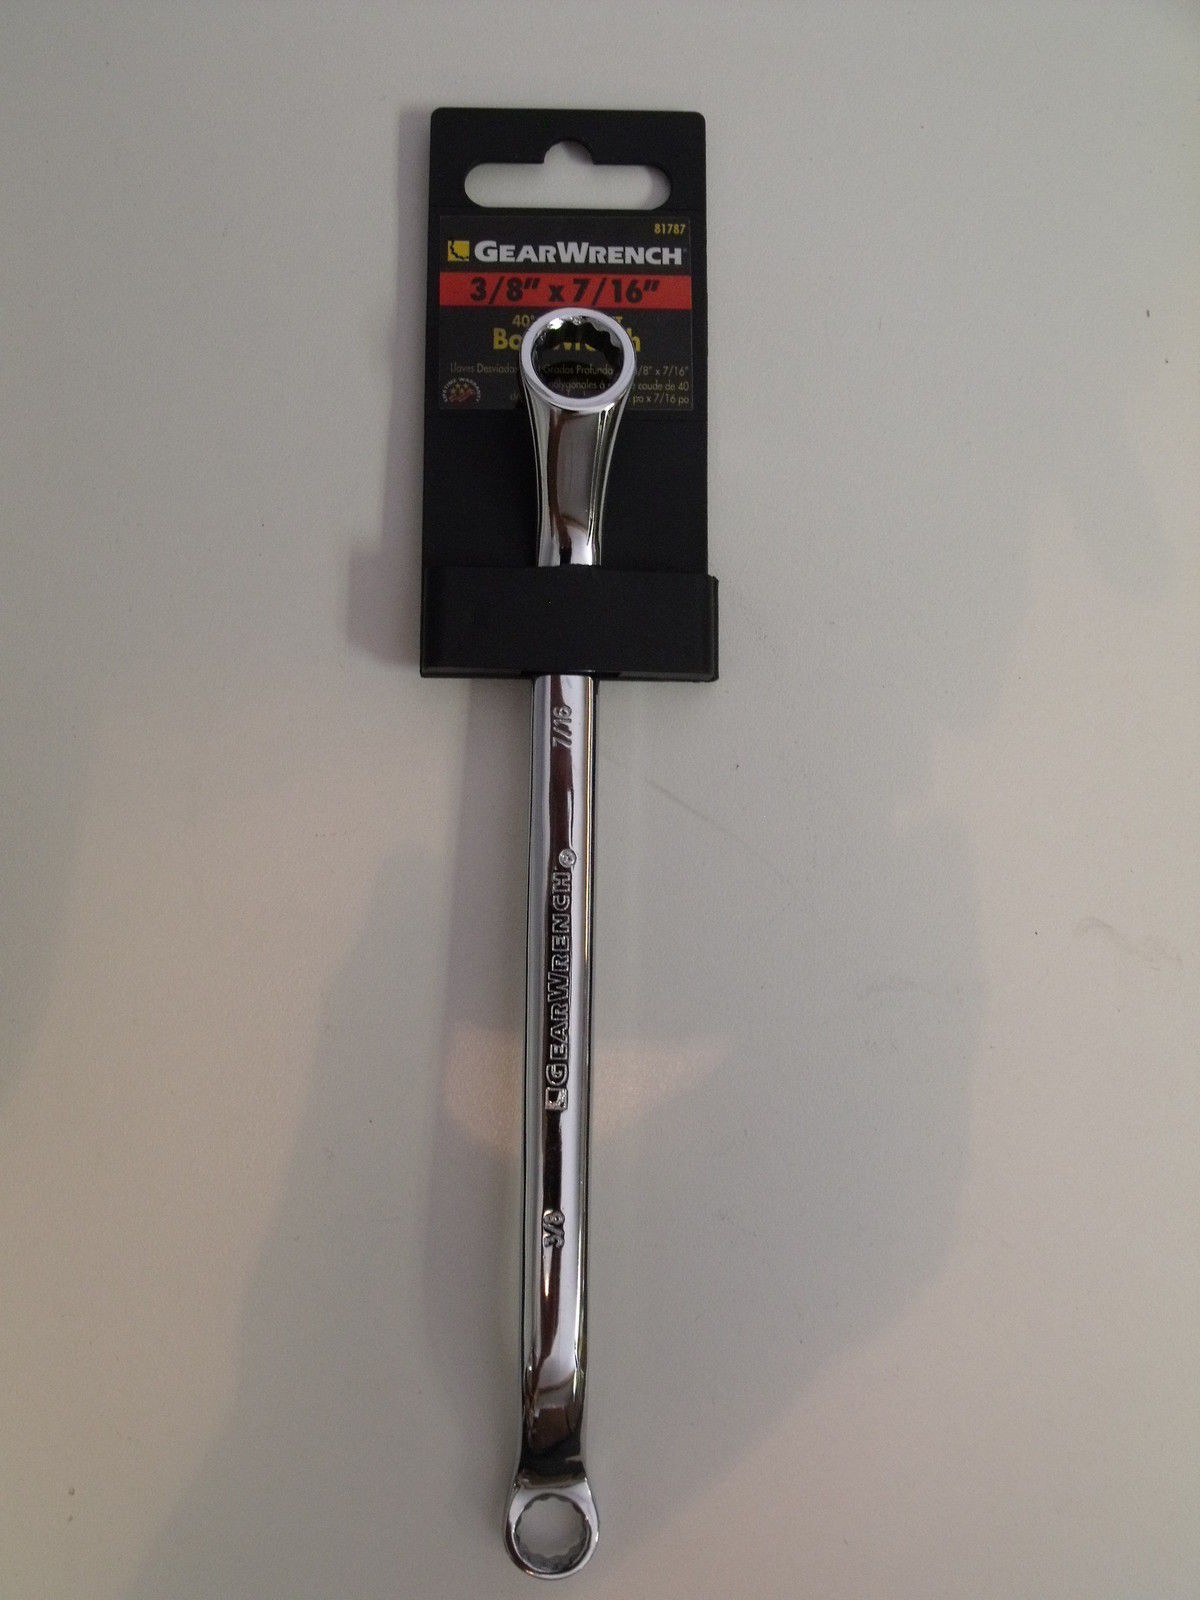 Gearwrench 81787 3/8" x 7/16" Offset Box Wrench Full Polish